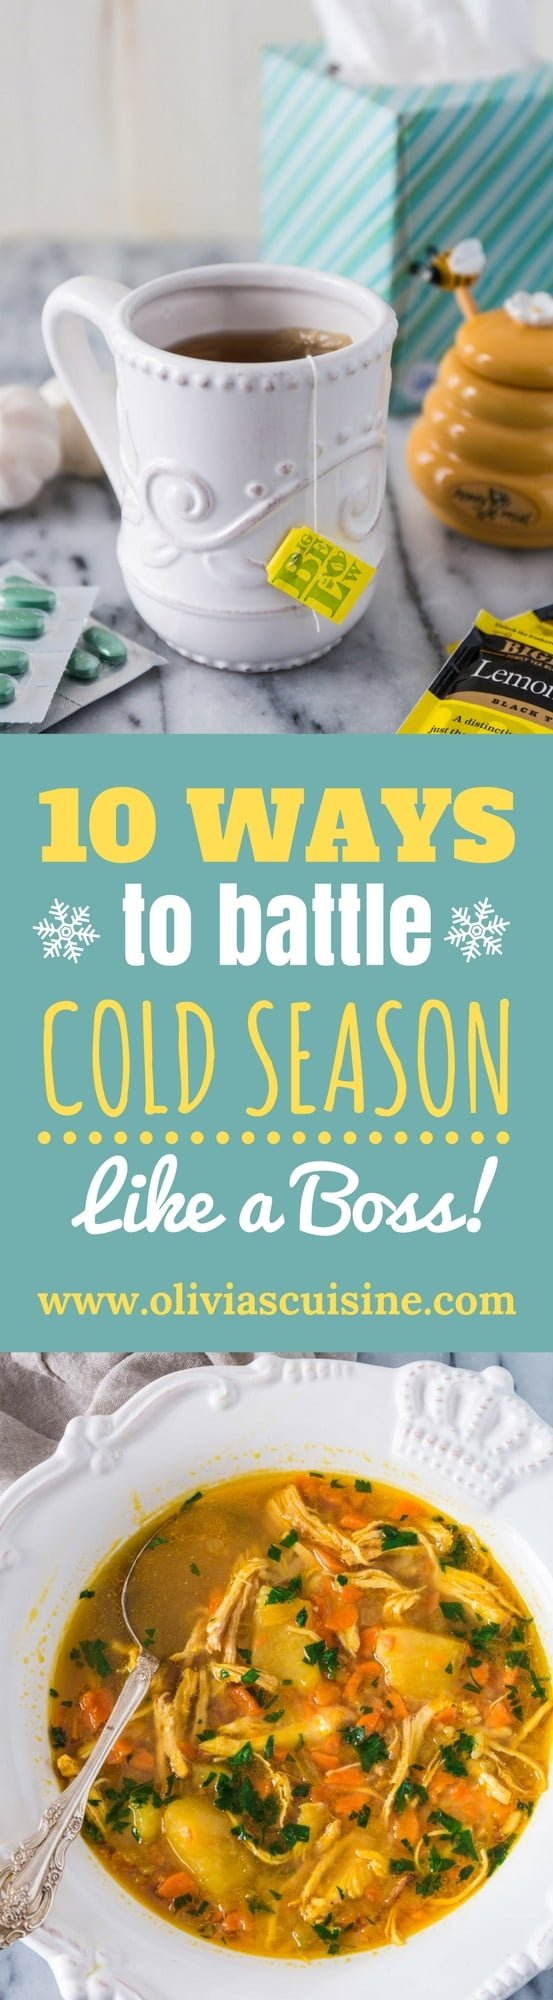 10 Ways To Battle Cold Season Like A Boss! | www.oliviascuisine.com | Cold season is here and it's only a matter of time until you have to deal with that annoying cold bug. But do not fret just yet! Just follow my tips and you will fight off this thing like a champ.